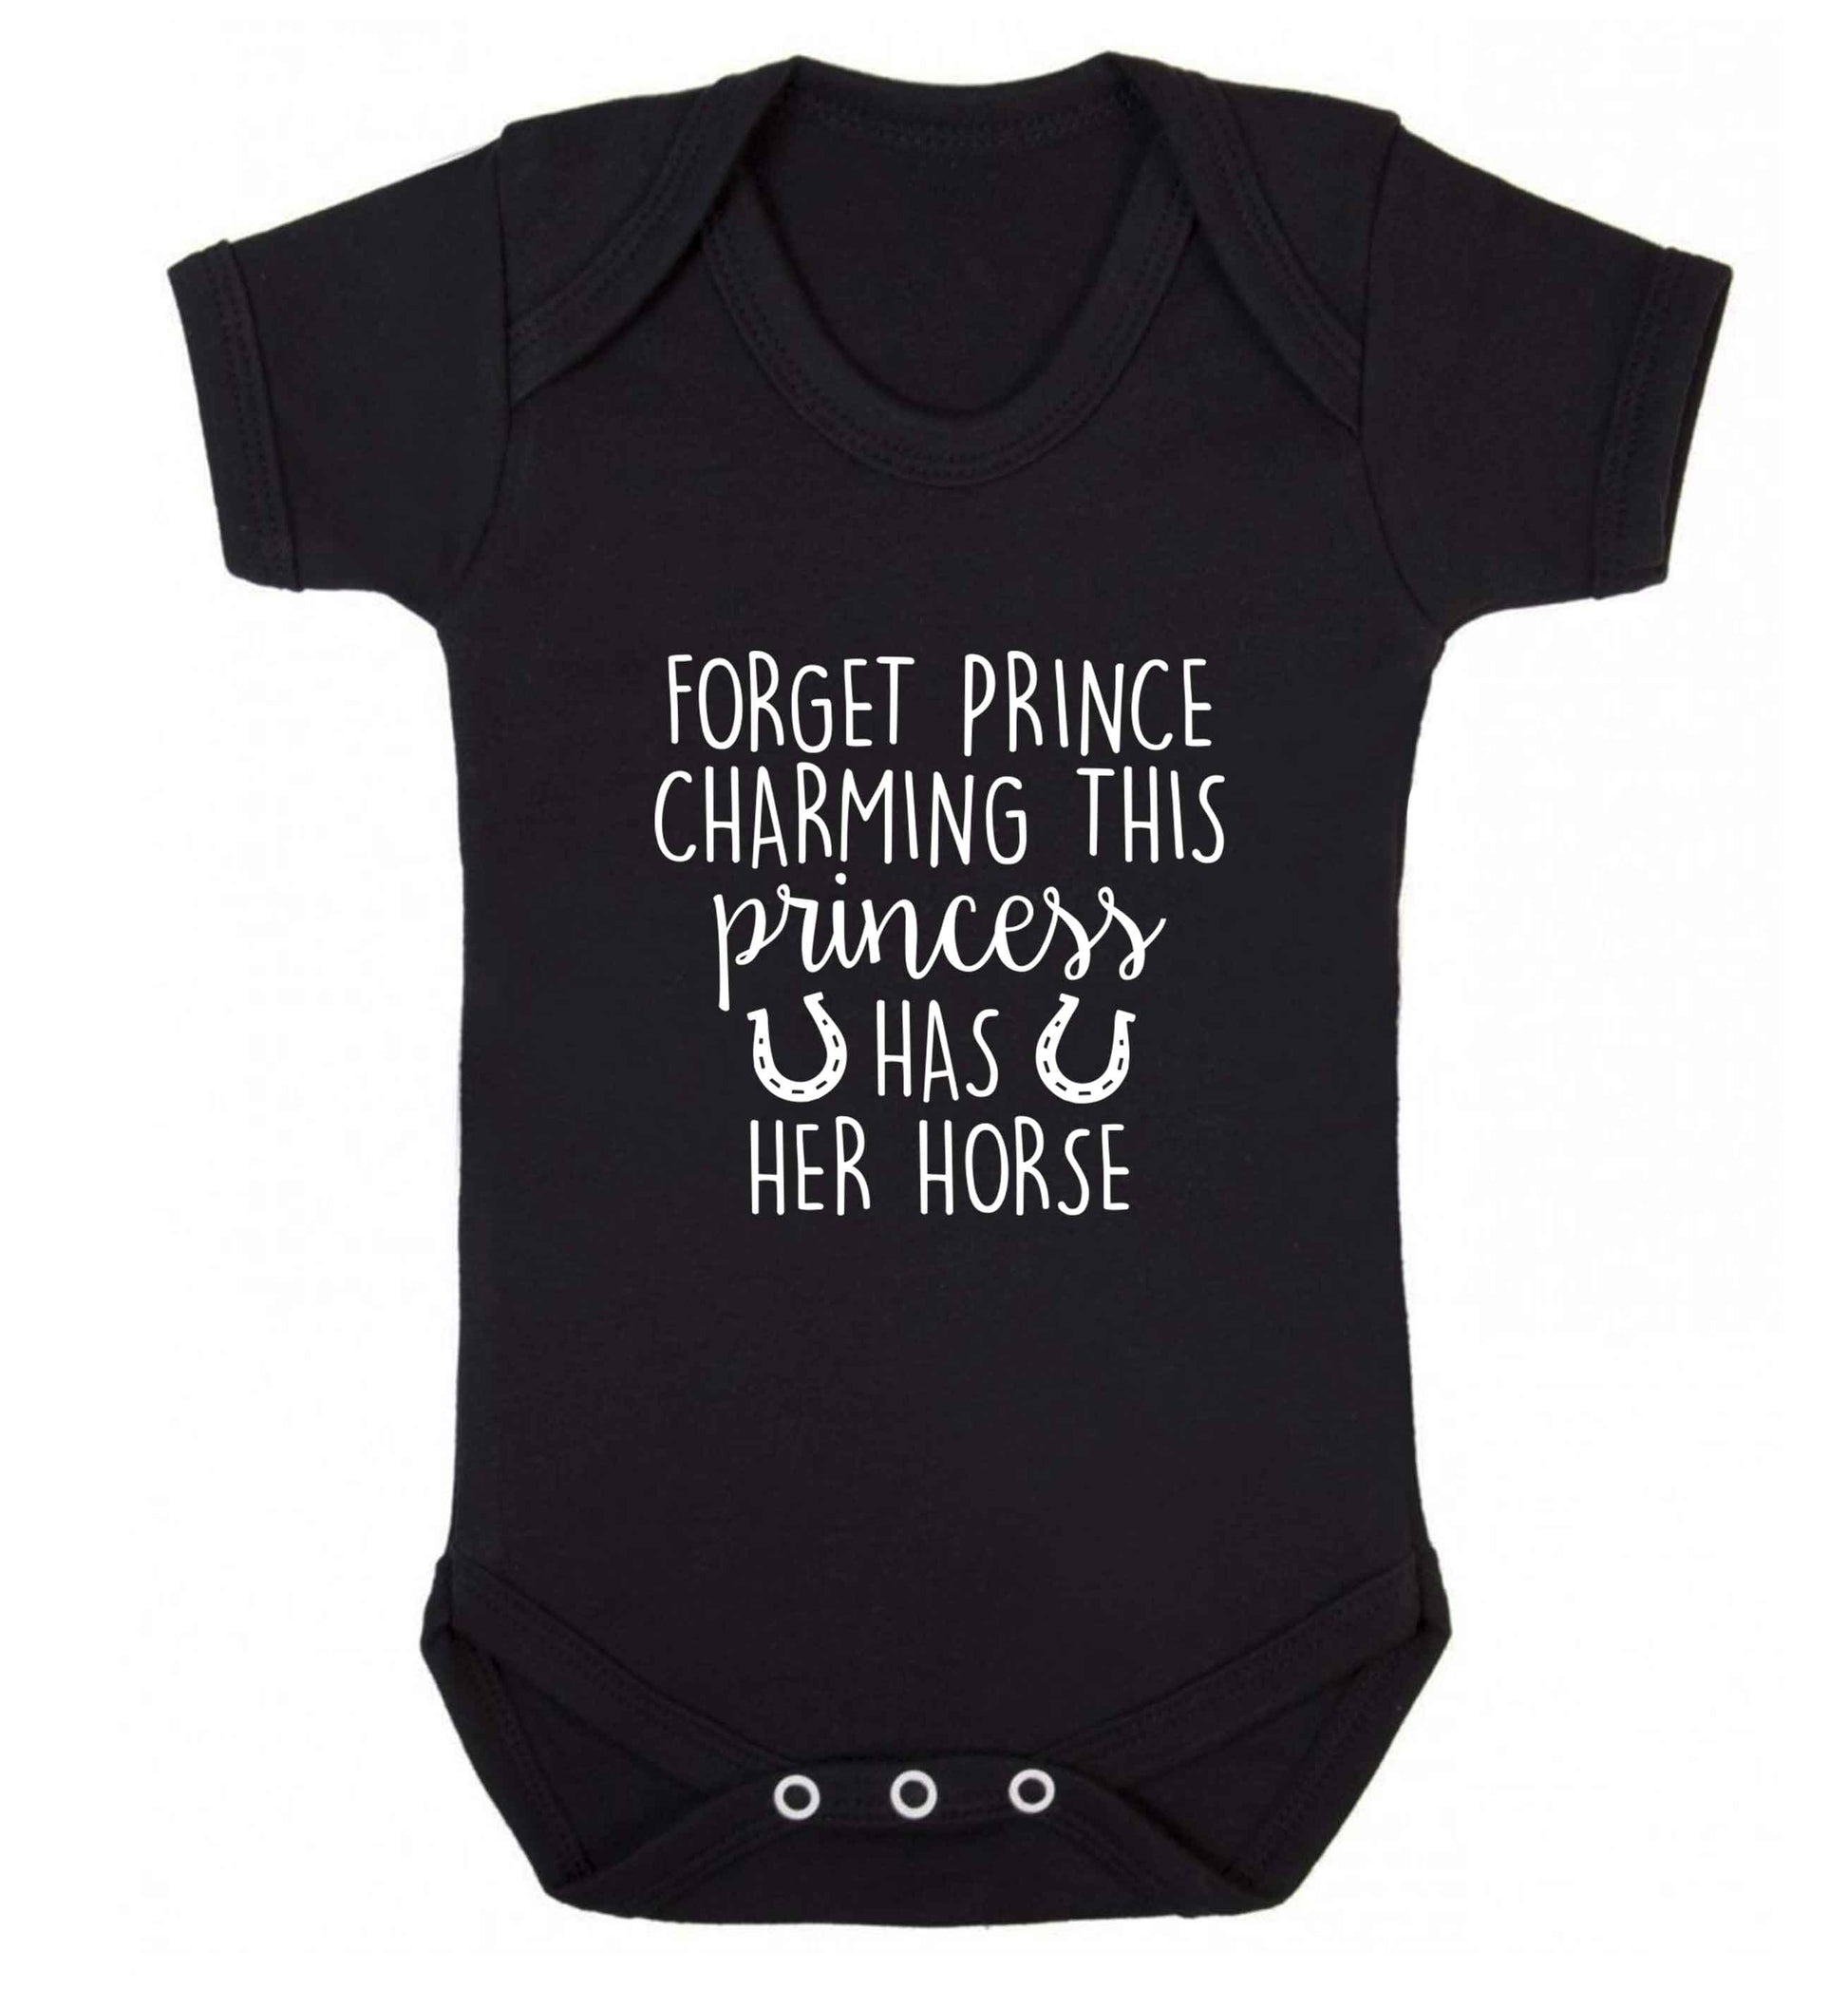 Forget prince charming this princess has her horse baby vest black 18-24 months